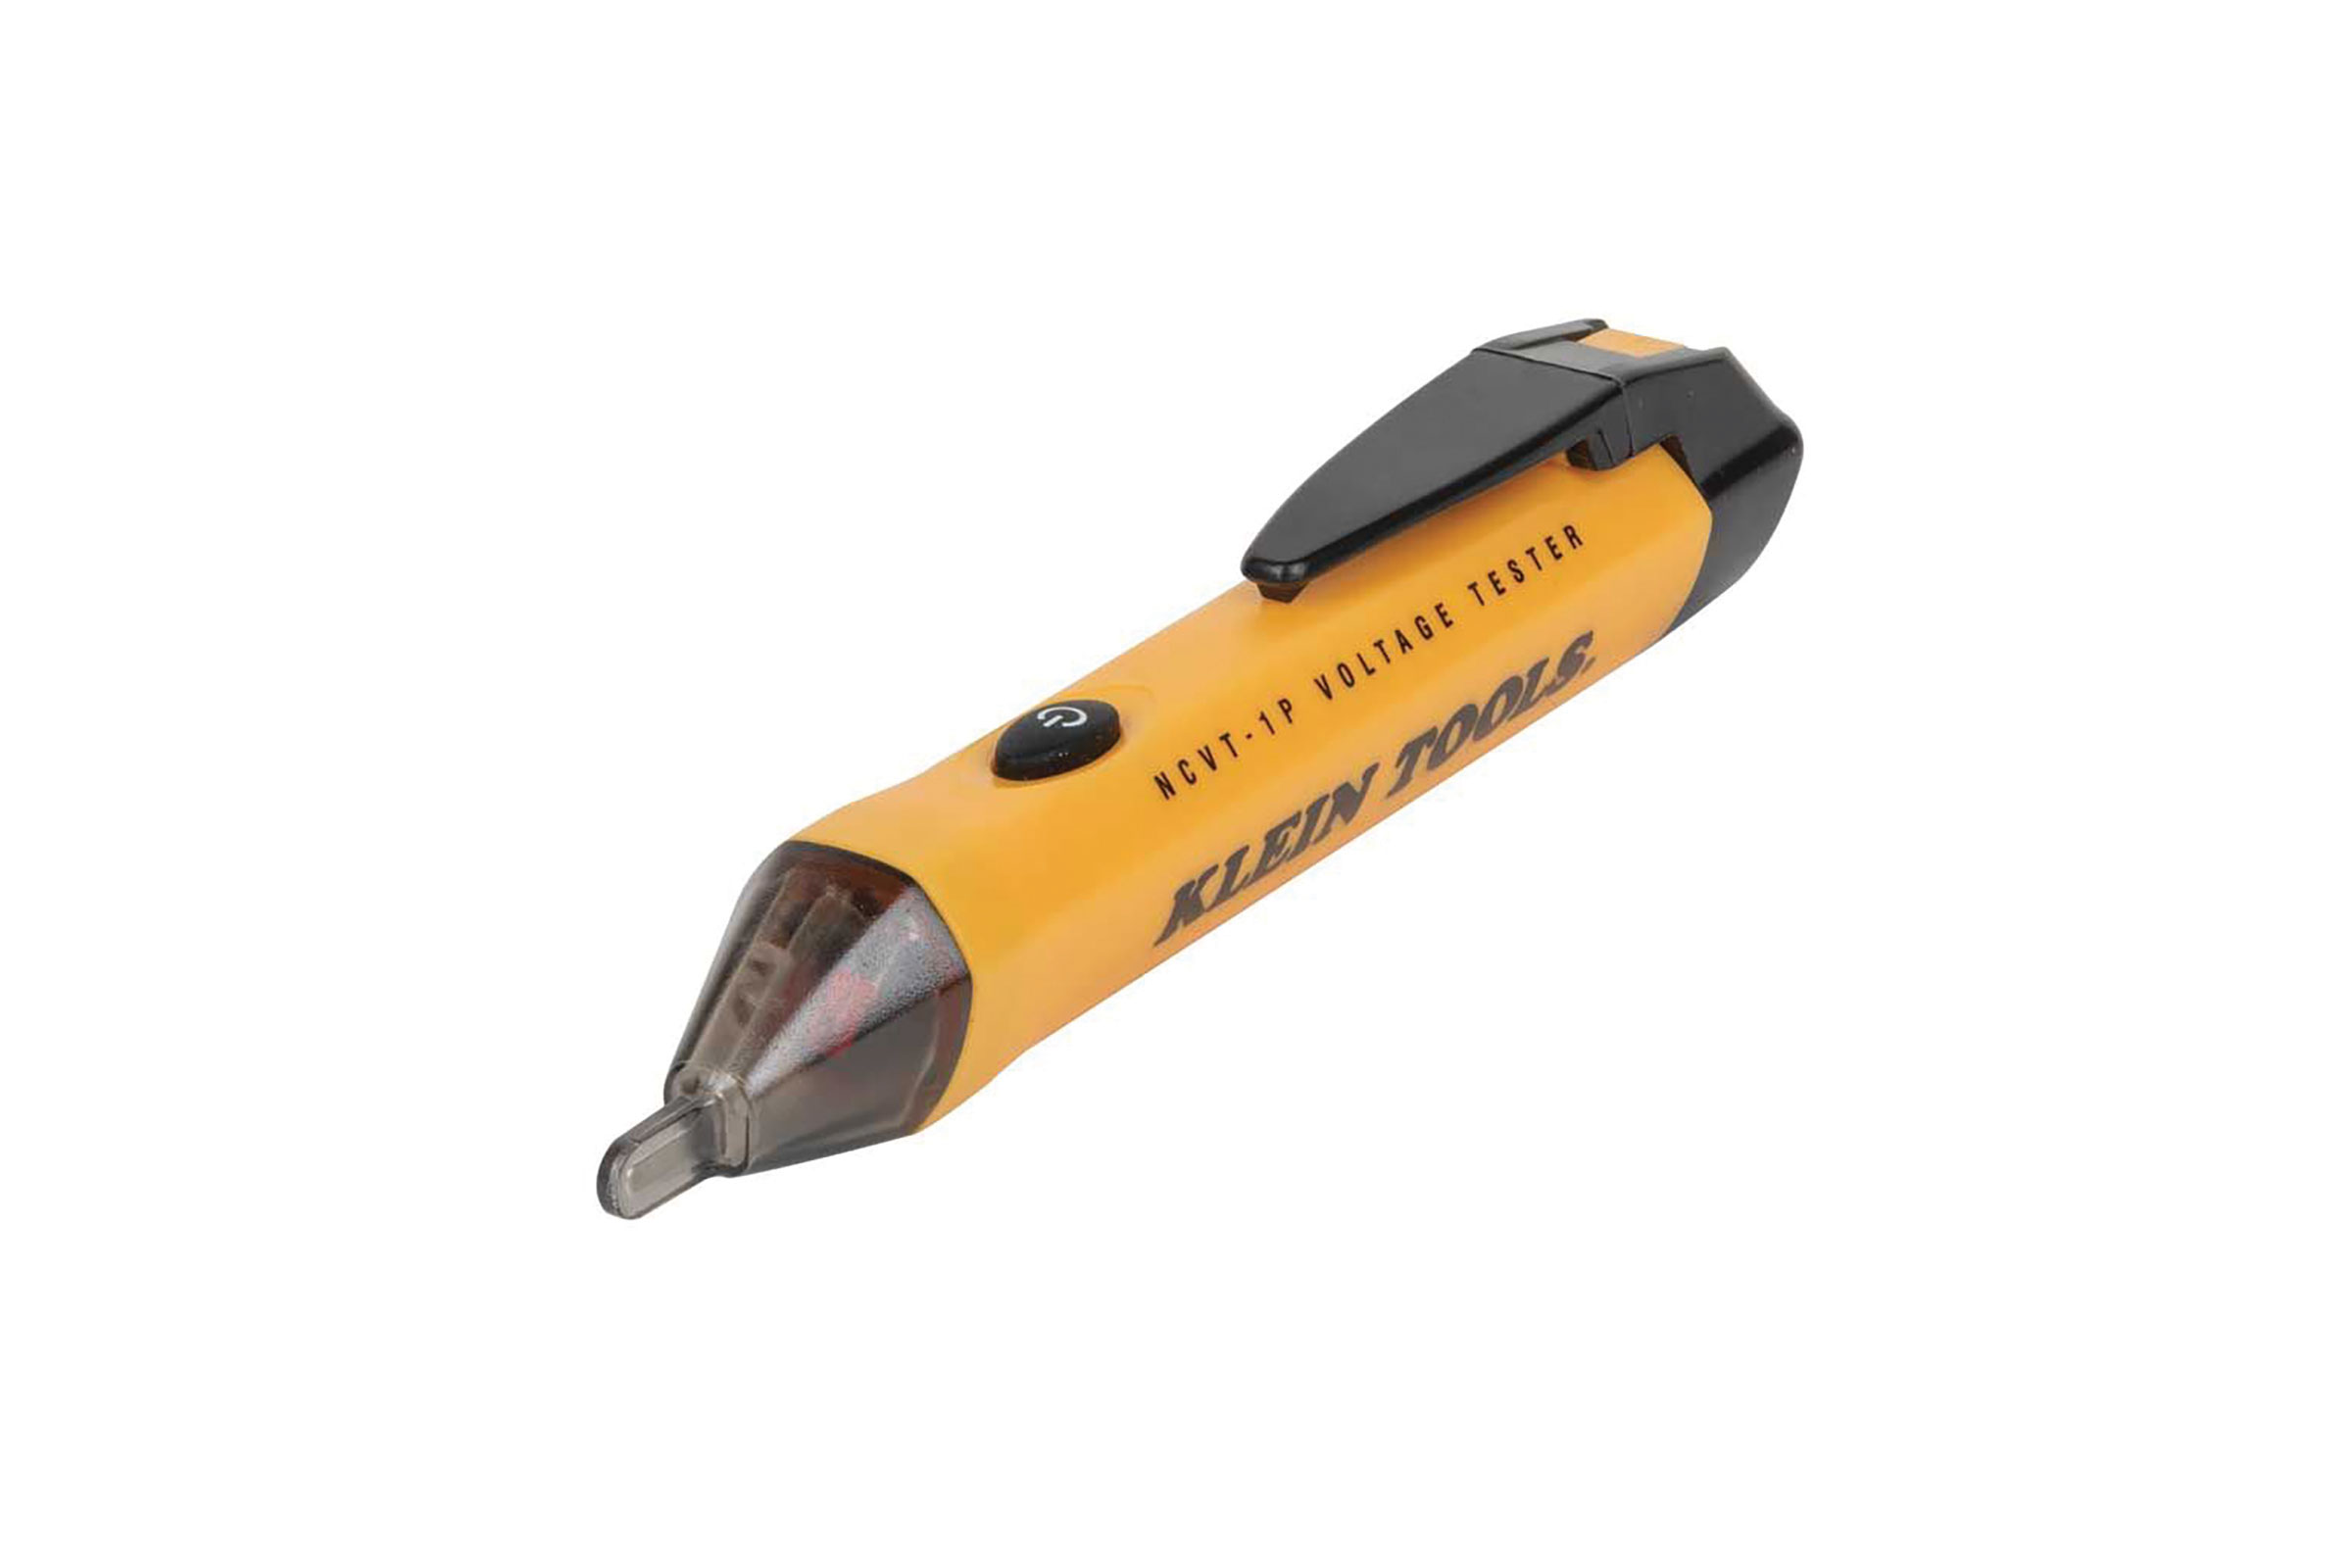 Yellow and gray voltage tester pen. Image by Klein Tools.